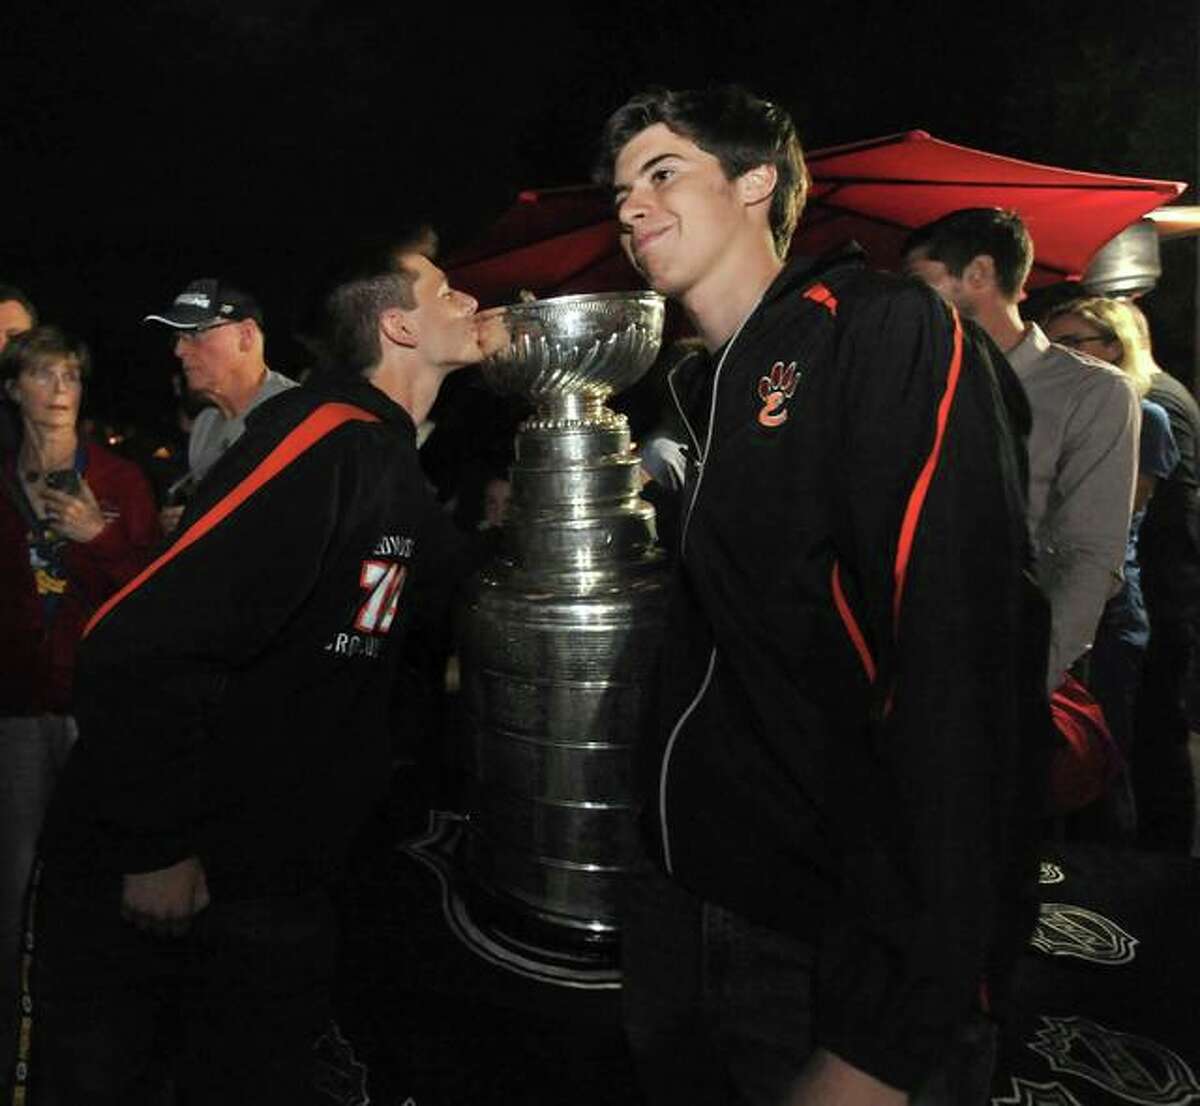 The Tigers were all smiling while getting their pictures taken with the Stanley Cup.